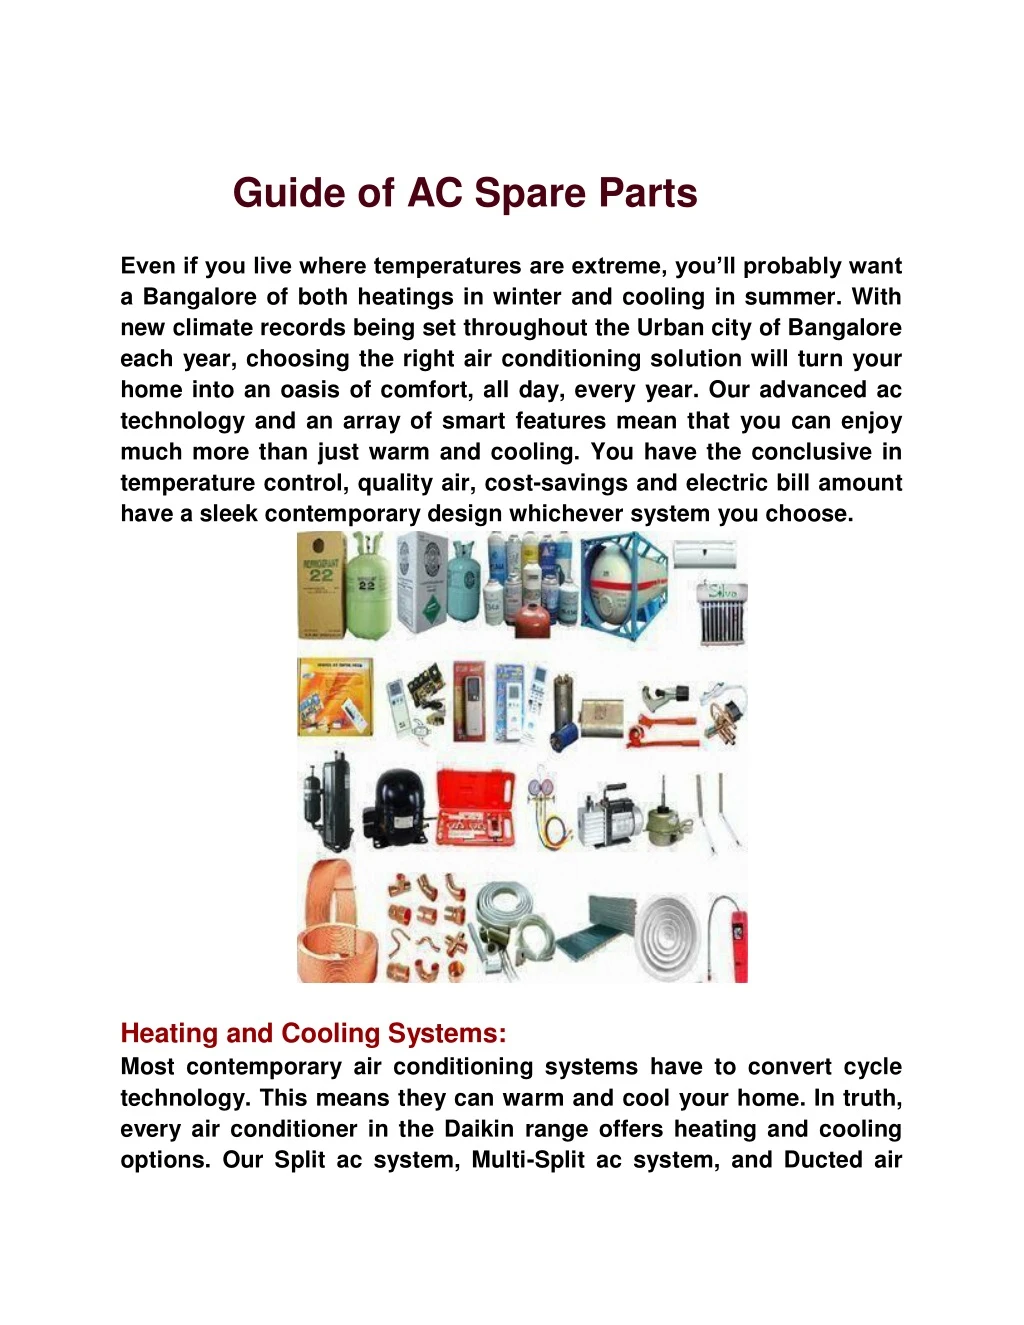 guide of ac spare parts even if you live where